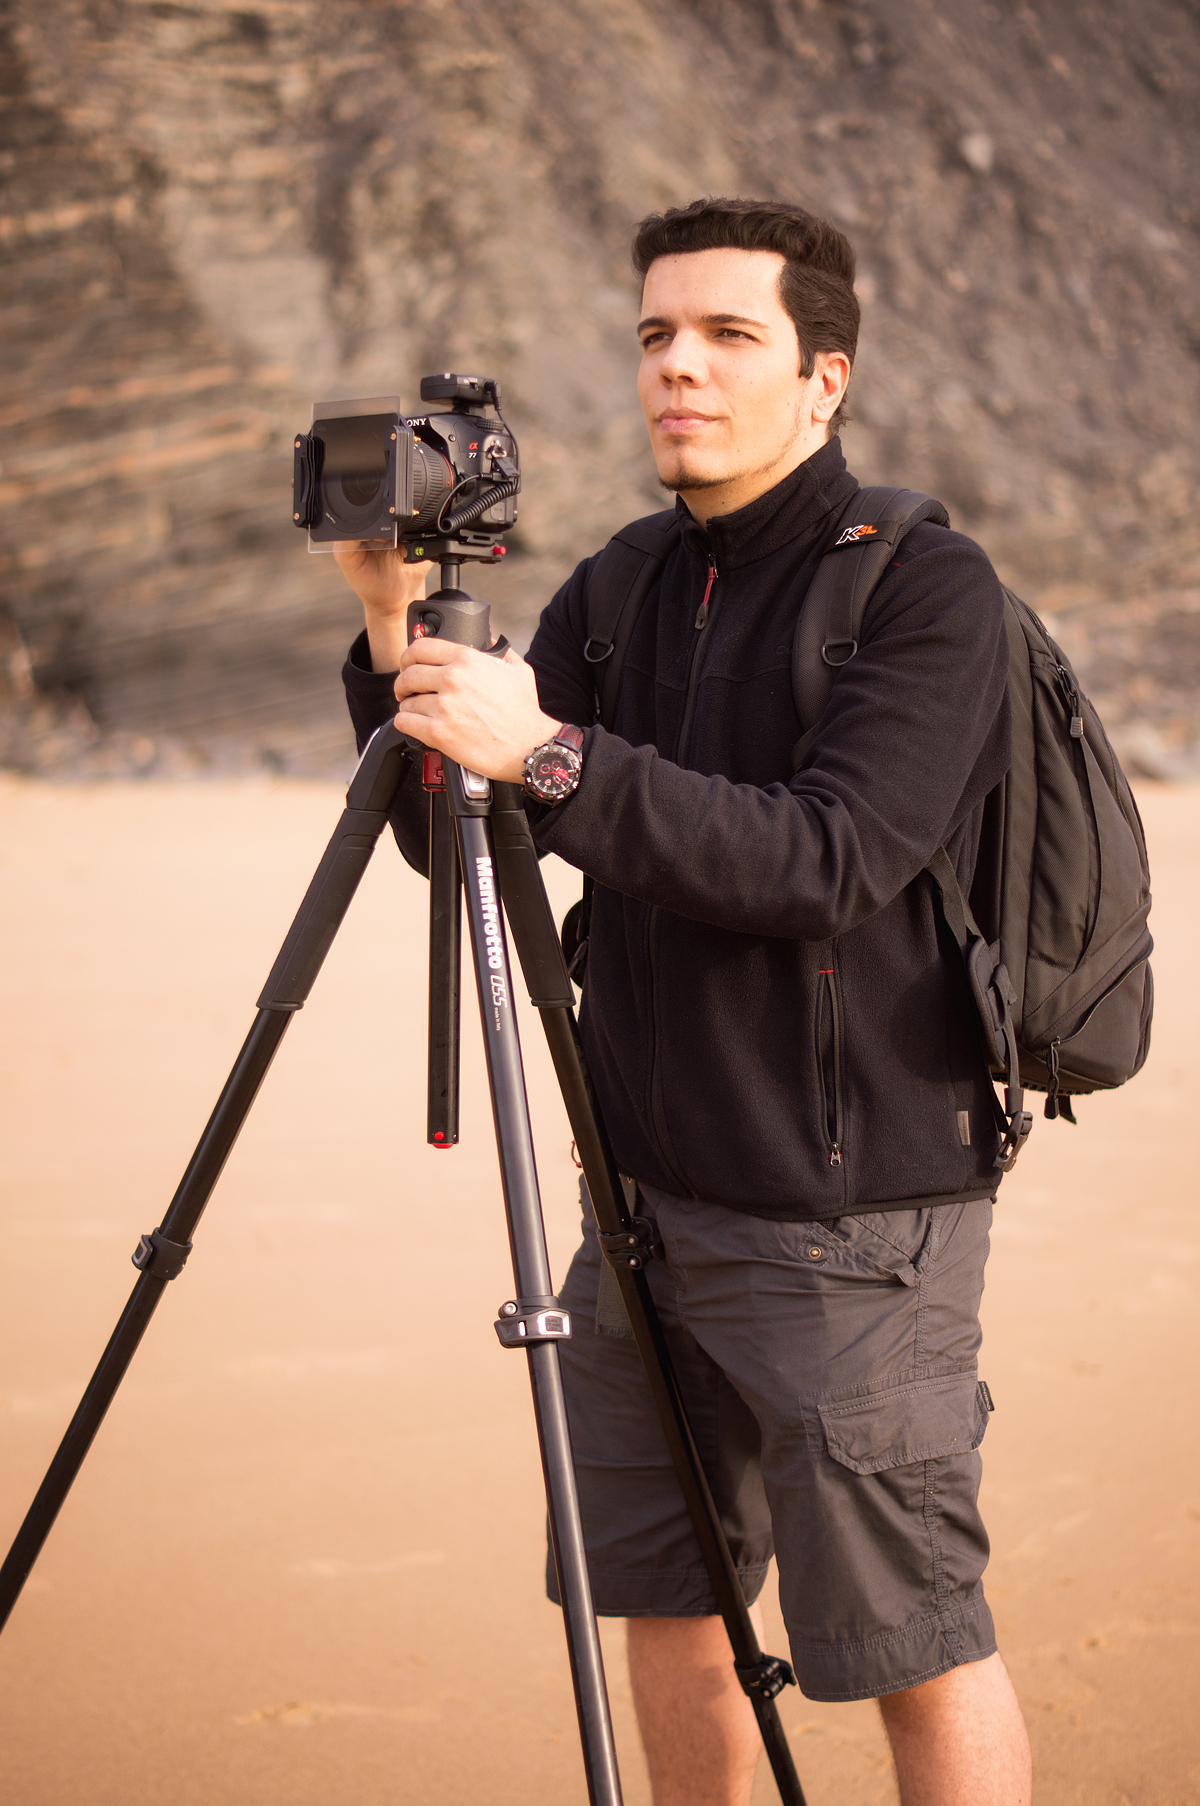 José Ramos shooting with the Manfrotto 055XPRO3 Tripod in Castelejo Beach (Algarve, Portugal)